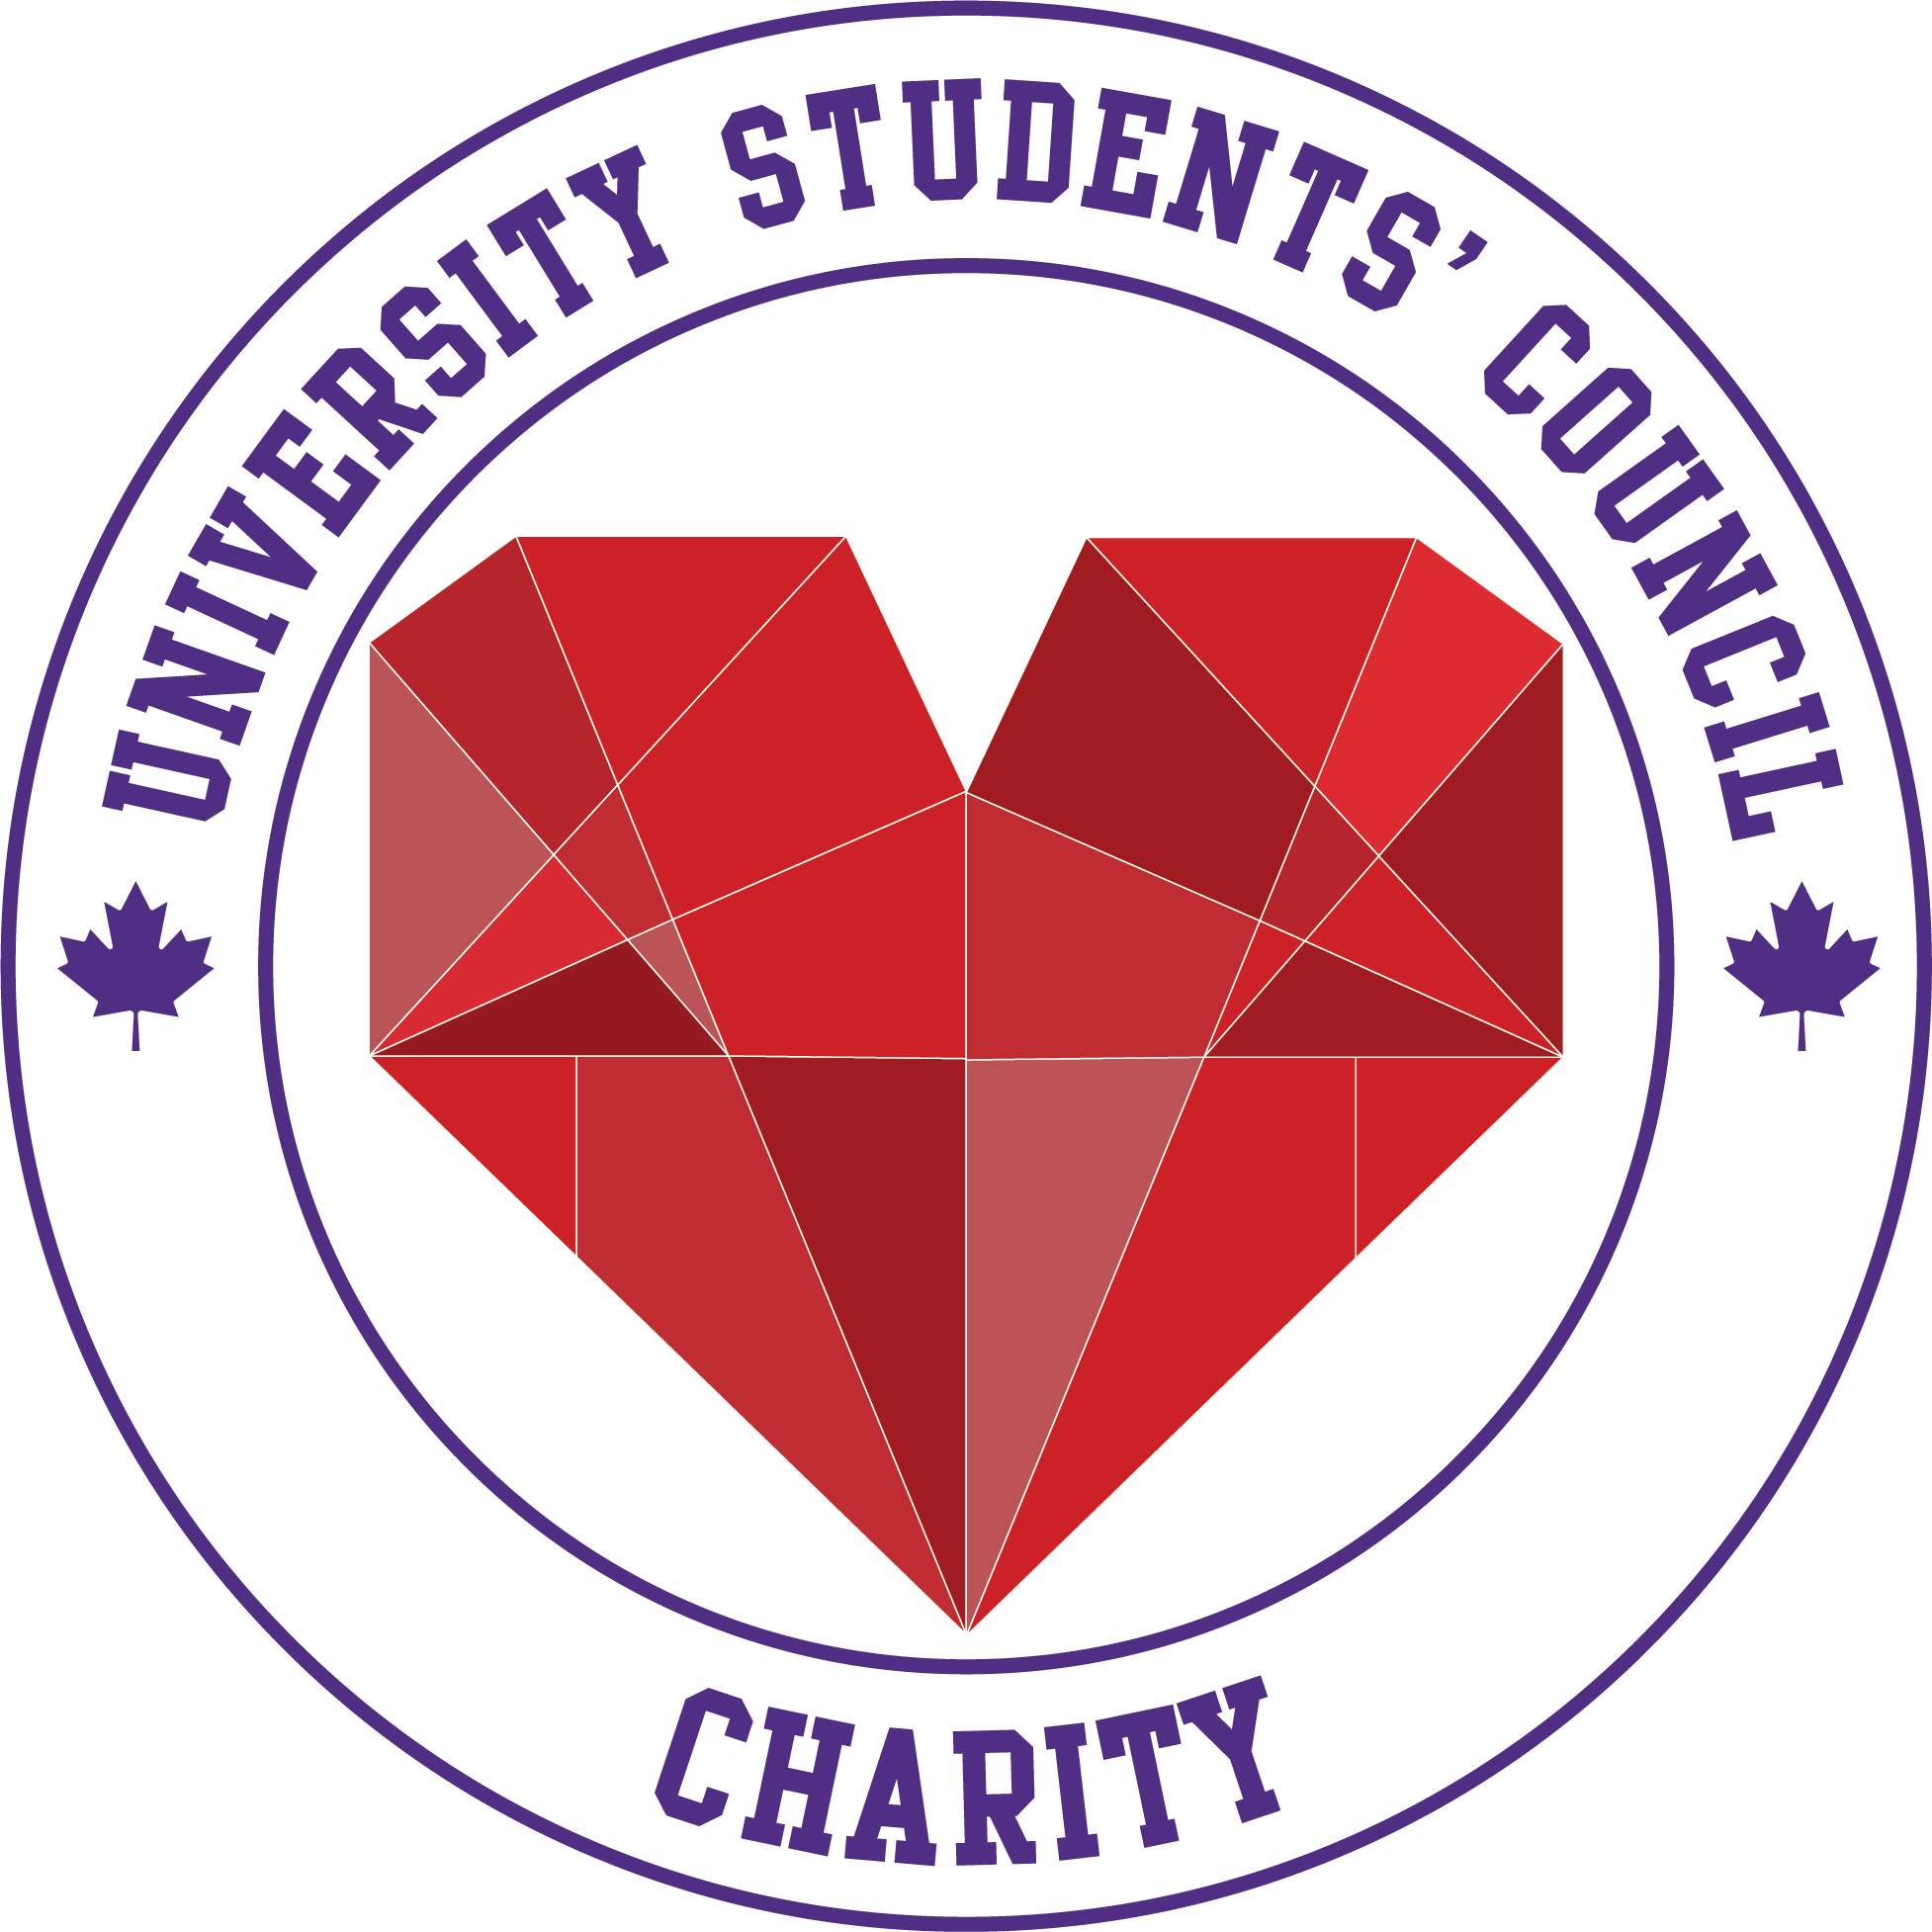 Charity Logo - Color